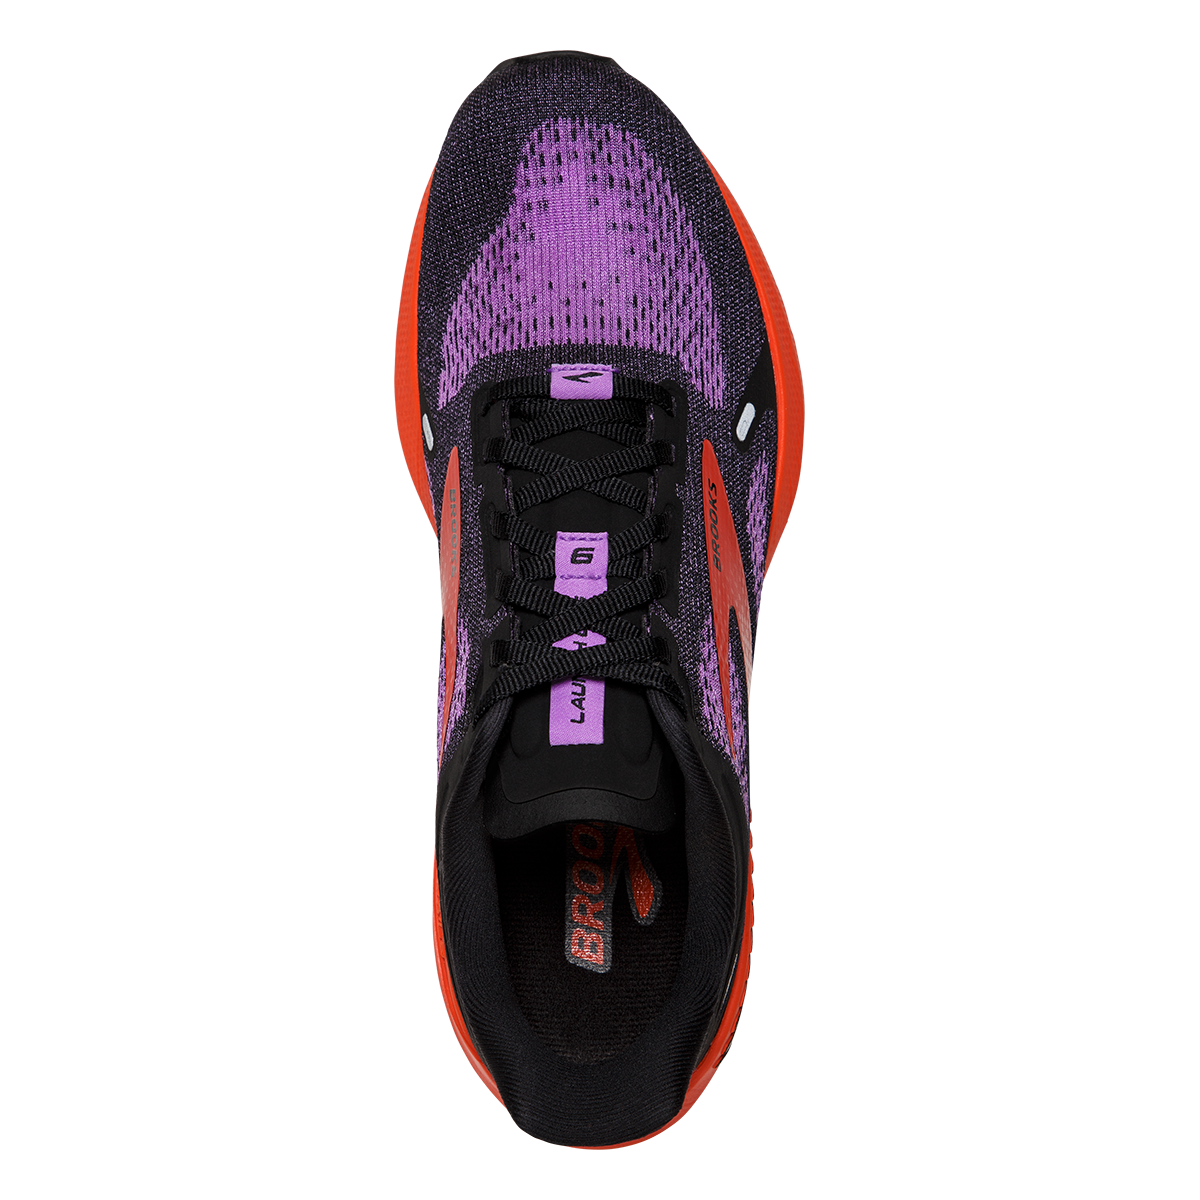 Brooks Launch GTS 9, , large image number null